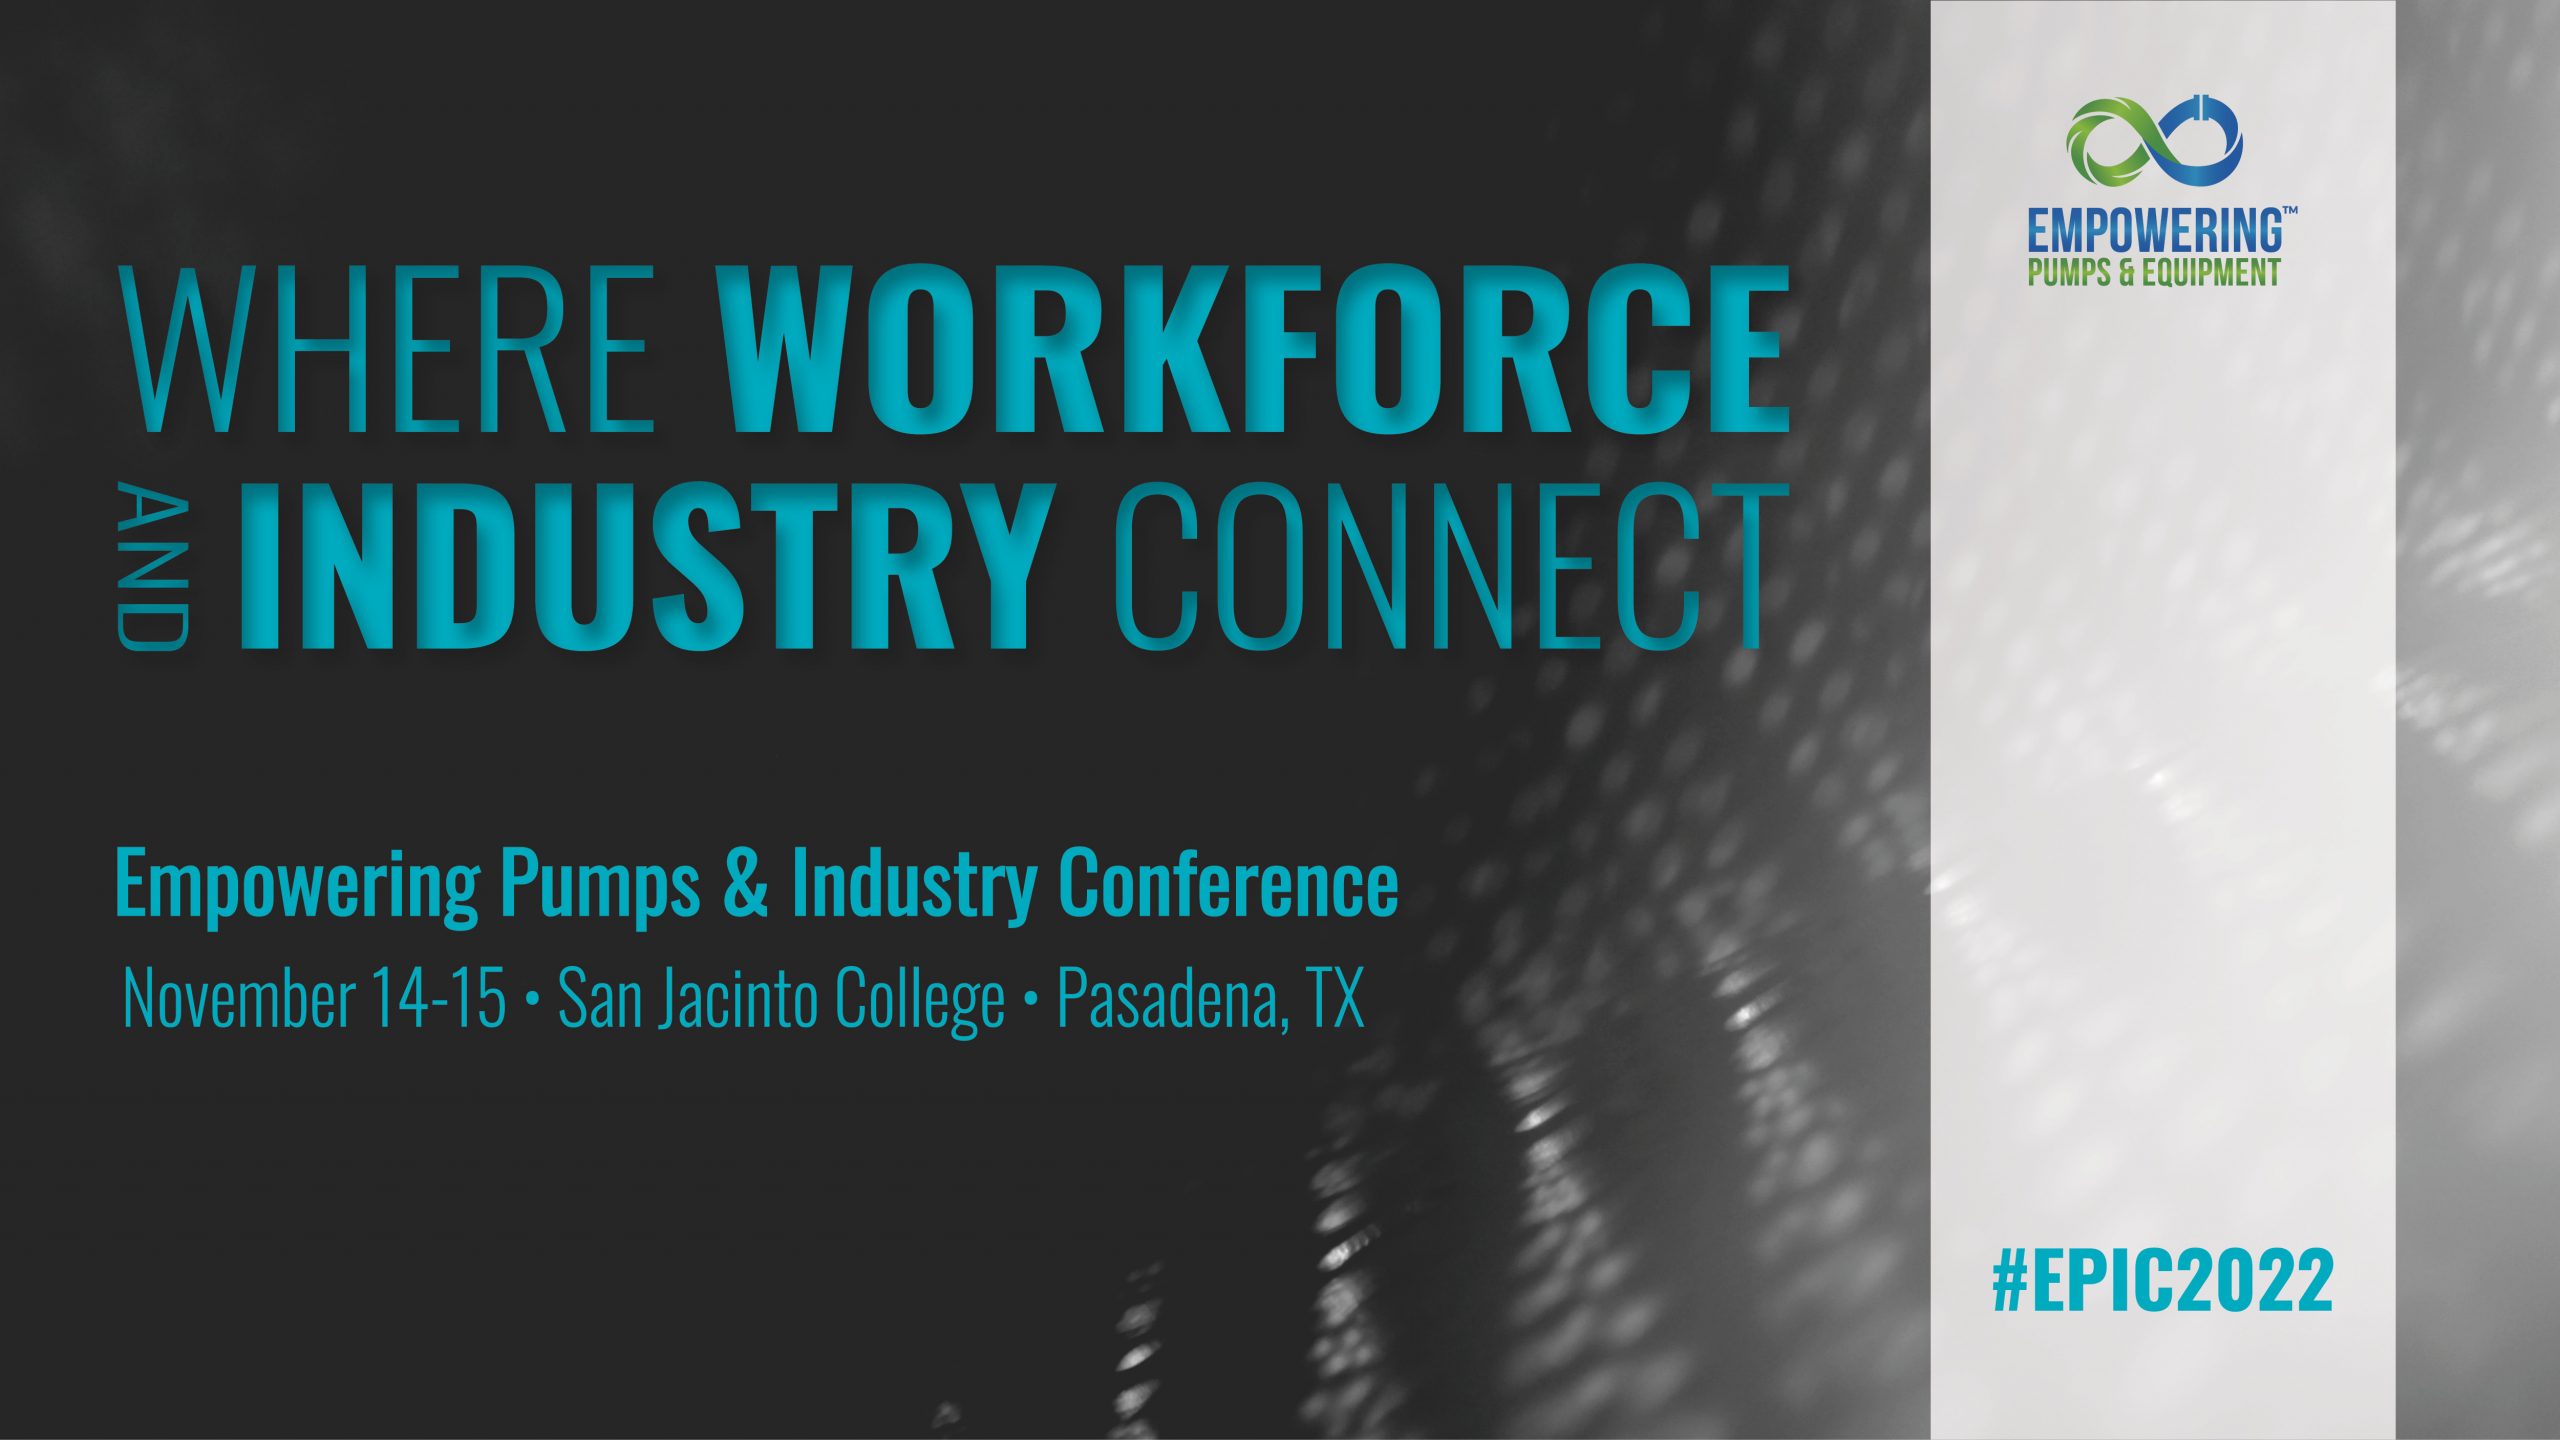 EPIC - Empowering Pumps & Industry Conference